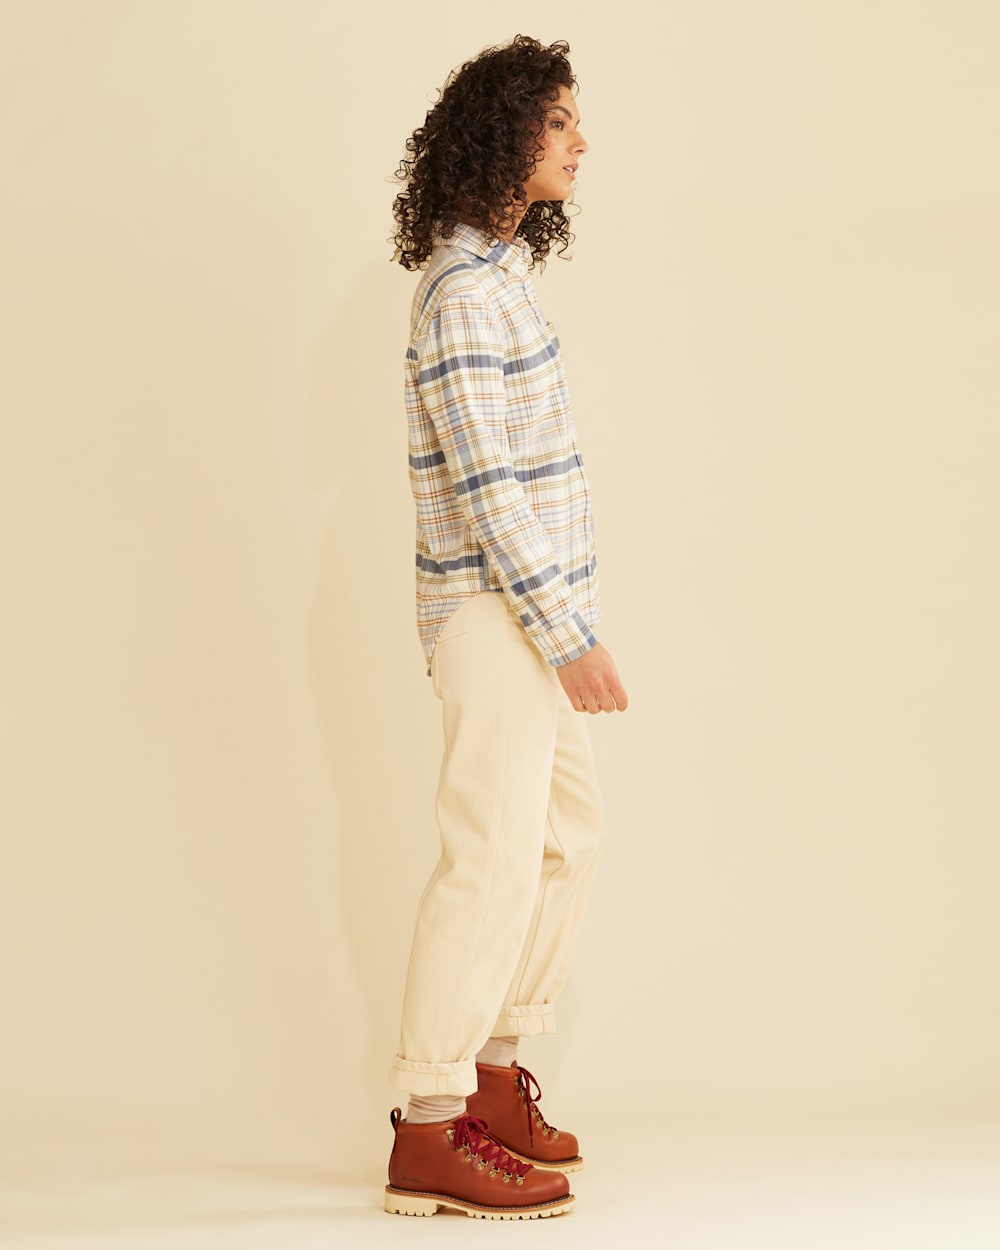 ALTERNATE VIEW OF WOMEN'S BOYFRIEND DOUBLE-BRUSHED FLANNEL SHIRT IN IVORY/INDIGO PLAID image number 2